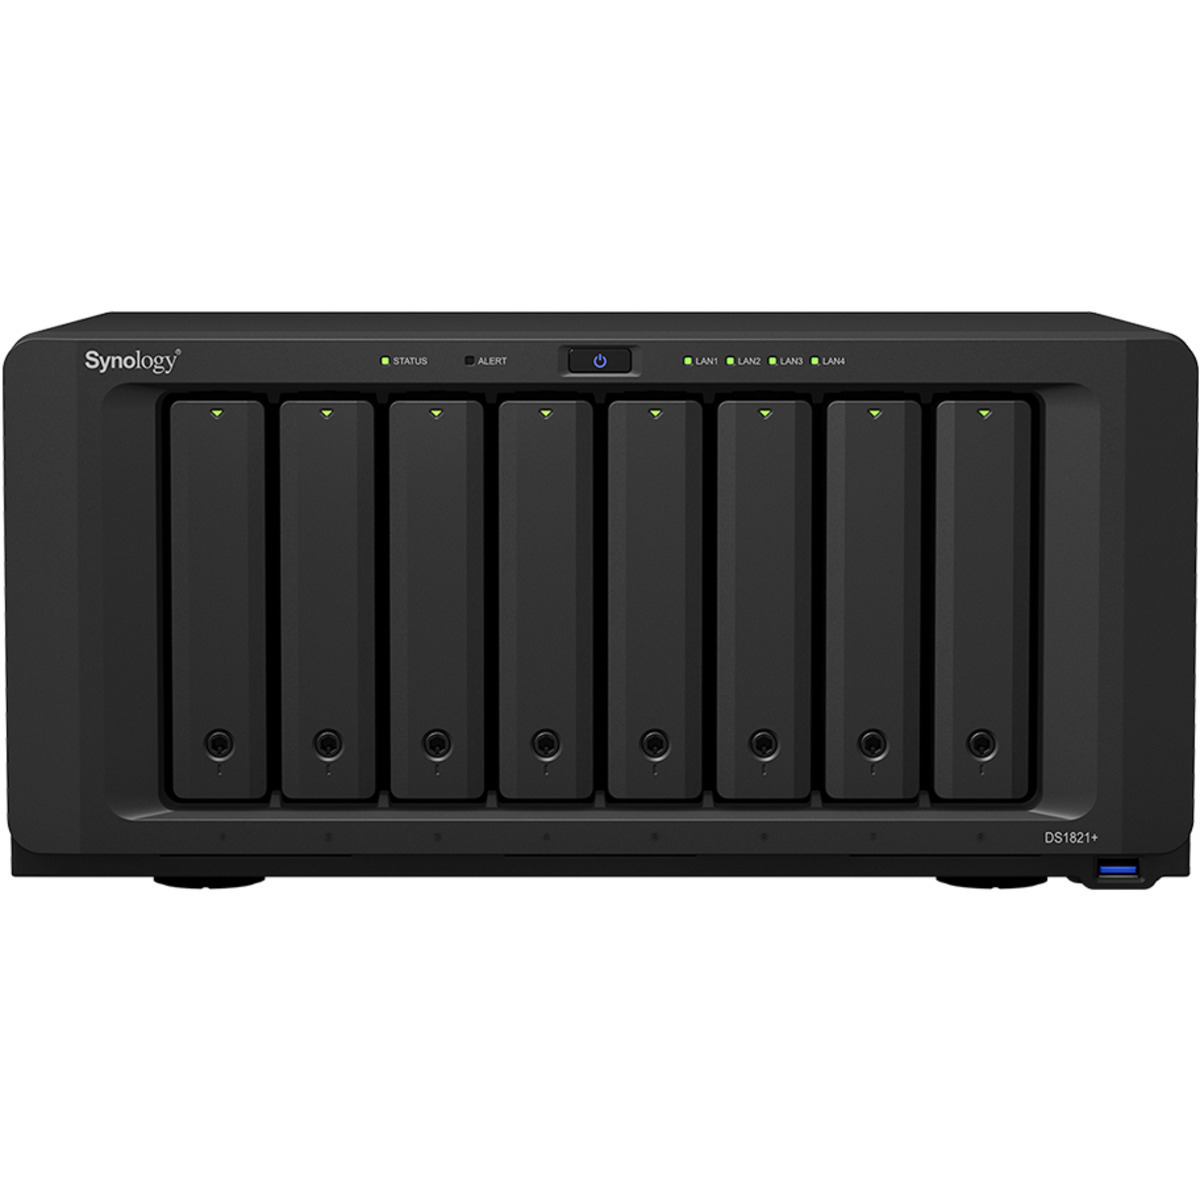 buy $3426 Synology DiskStation DS1821+ 16tb Desktop NAS - Network Attached Storage Device 8x2000gb Western Digital Red SA500 WDS200T1R0A 2.5 SATA 6Gb/s SSD NAS Class Drives Installed - Burn-In Tested - FREE RAM UPGRADE - nas headquarters buy network attached storage server device das new raid-5 free shipping usa DiskStation DS1821+